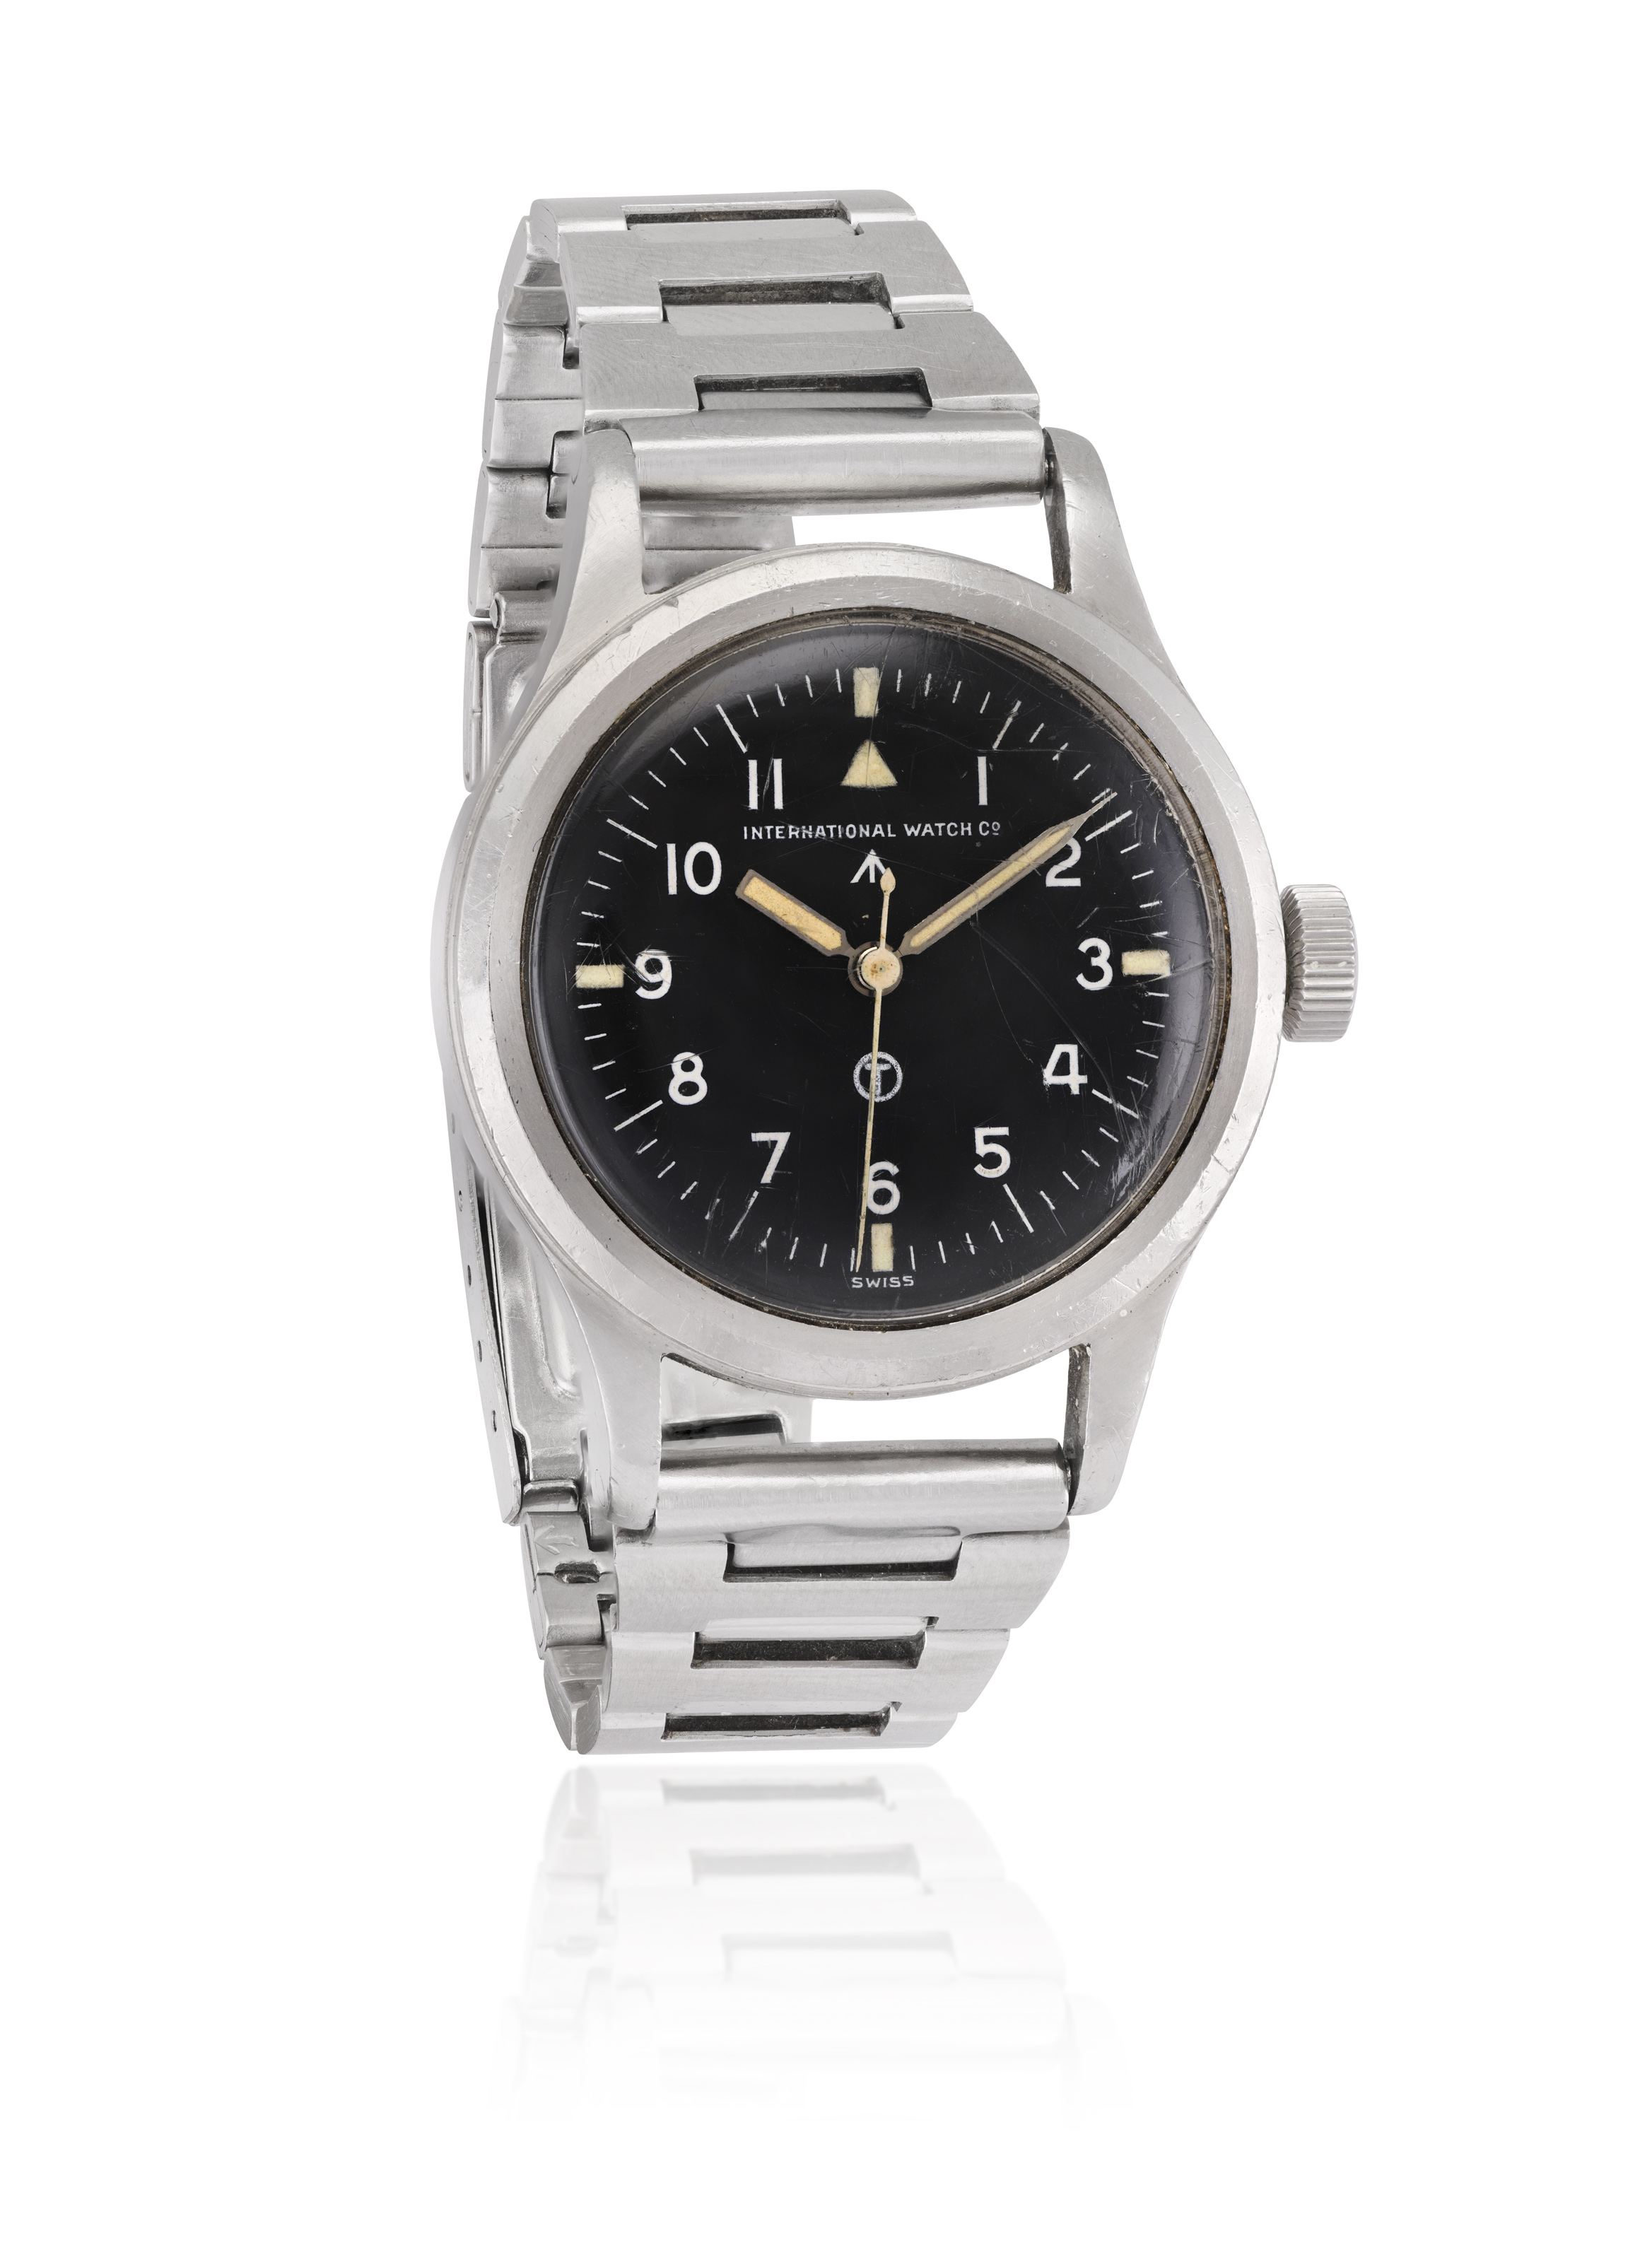 A STAINLESS STEEL WATCH, BY IWC Of manual wind movement Cal-c89, the circular black dial, white